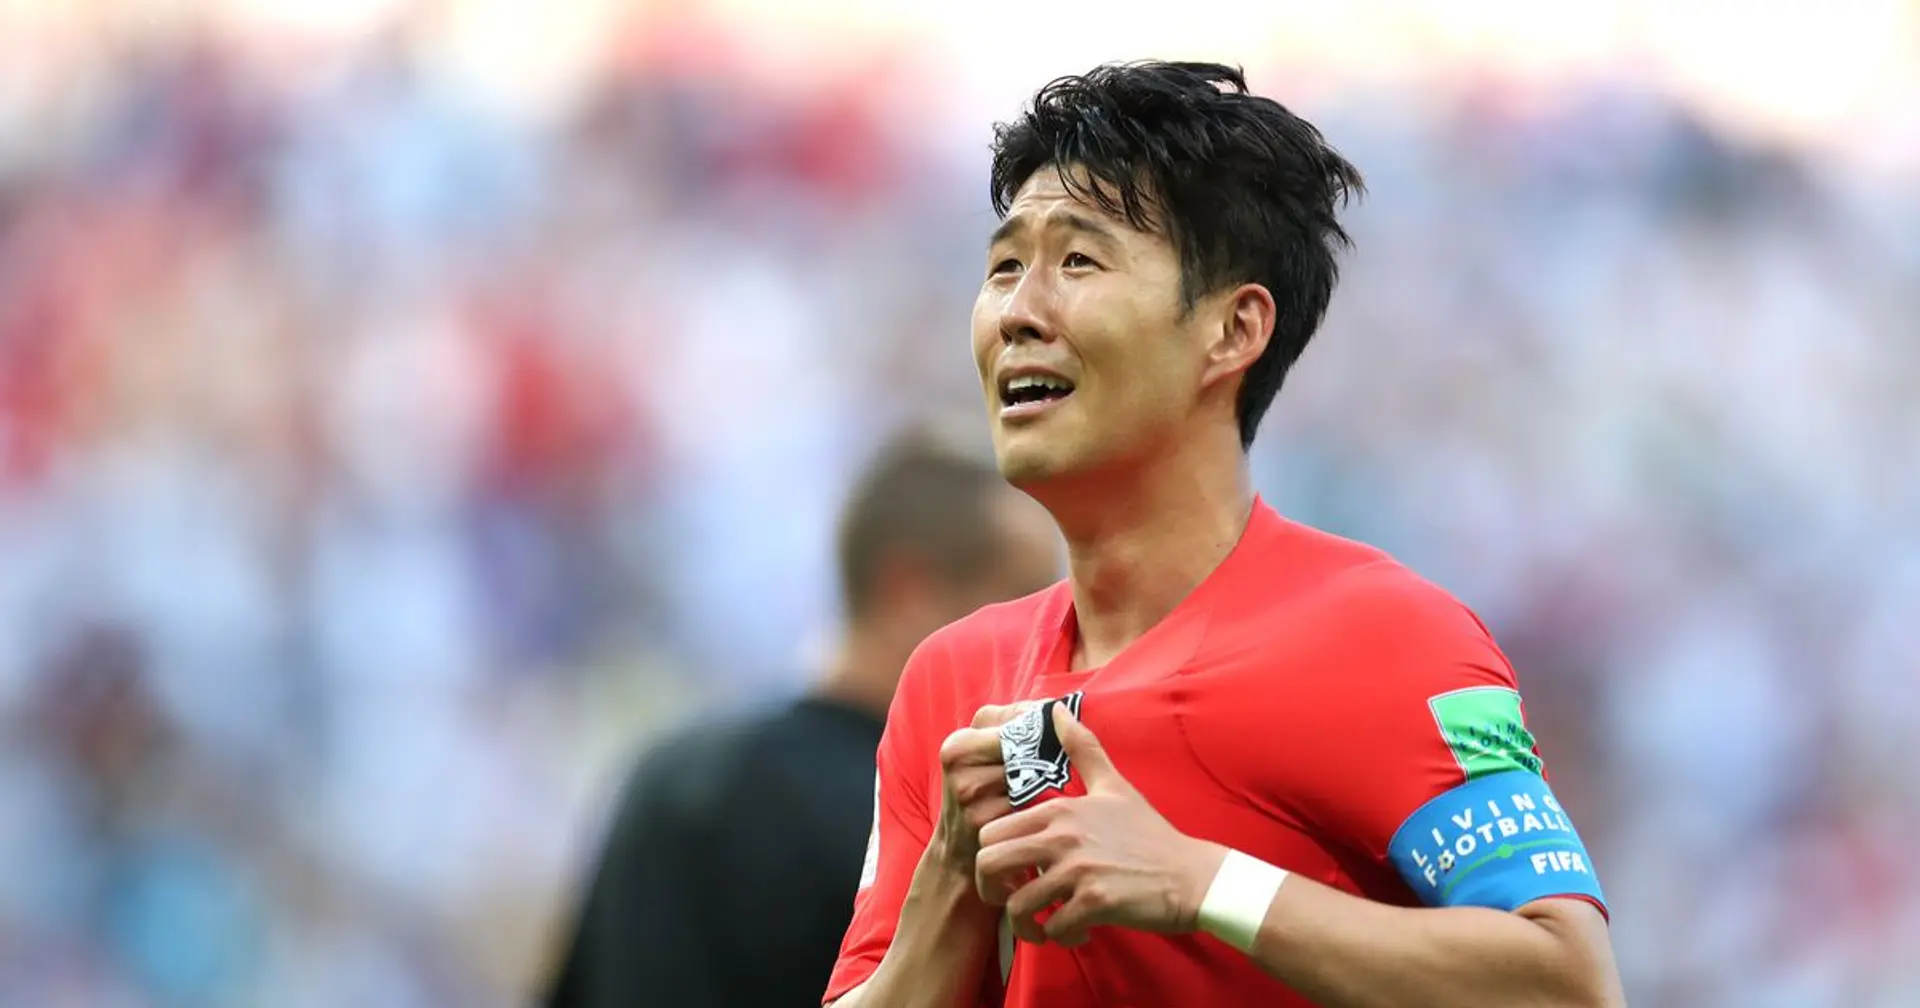 Son Heung-min claims he 'took revenge' for racism he faced in Germany by 'watching Germans cry'